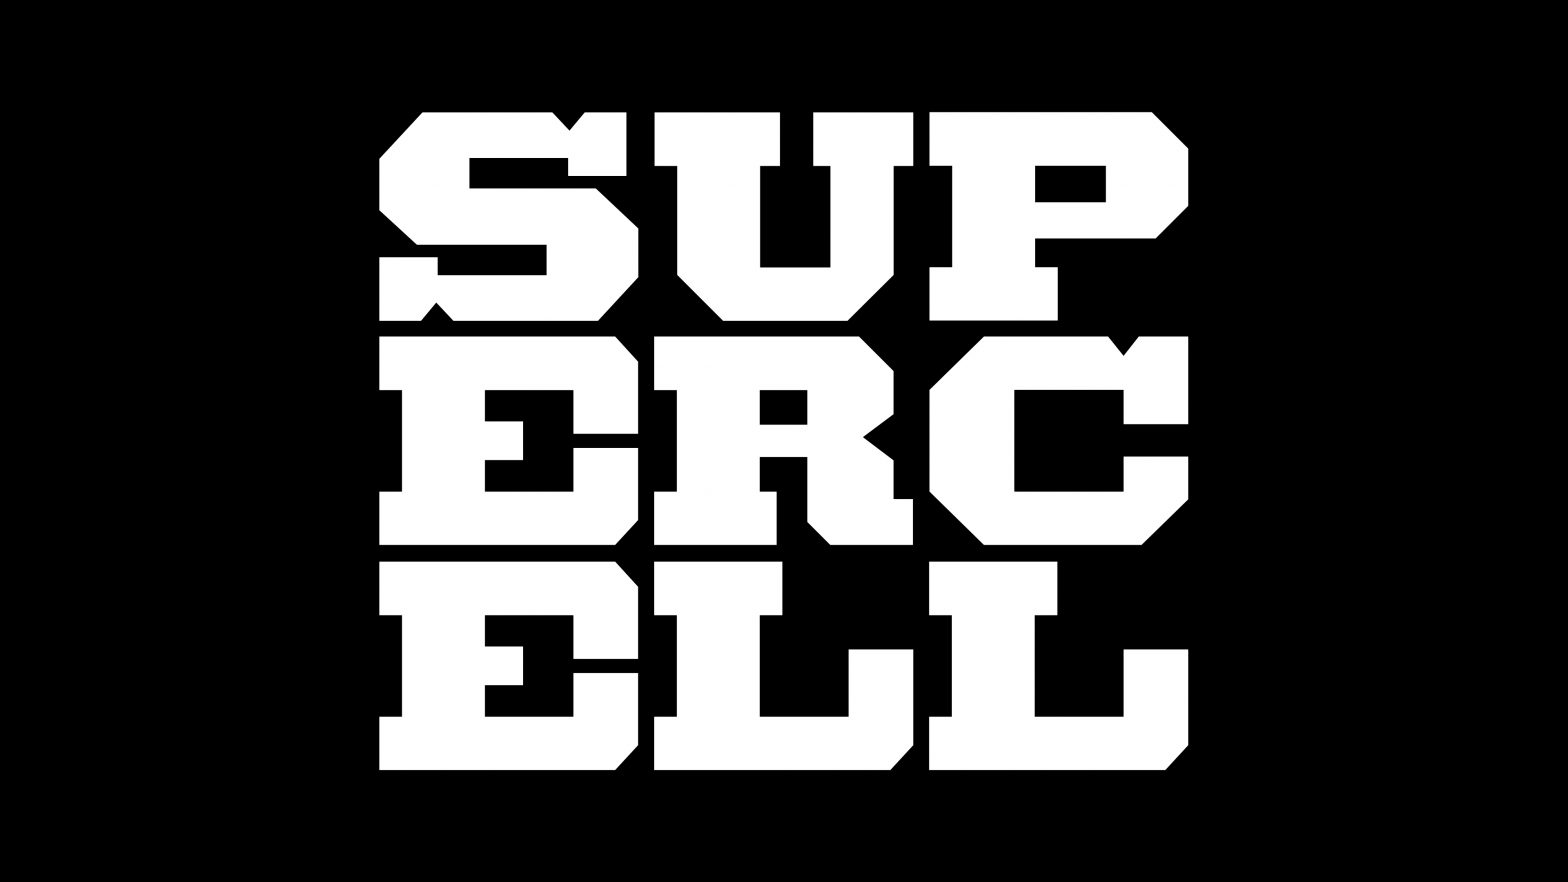 Future Opportunities with Supercell!